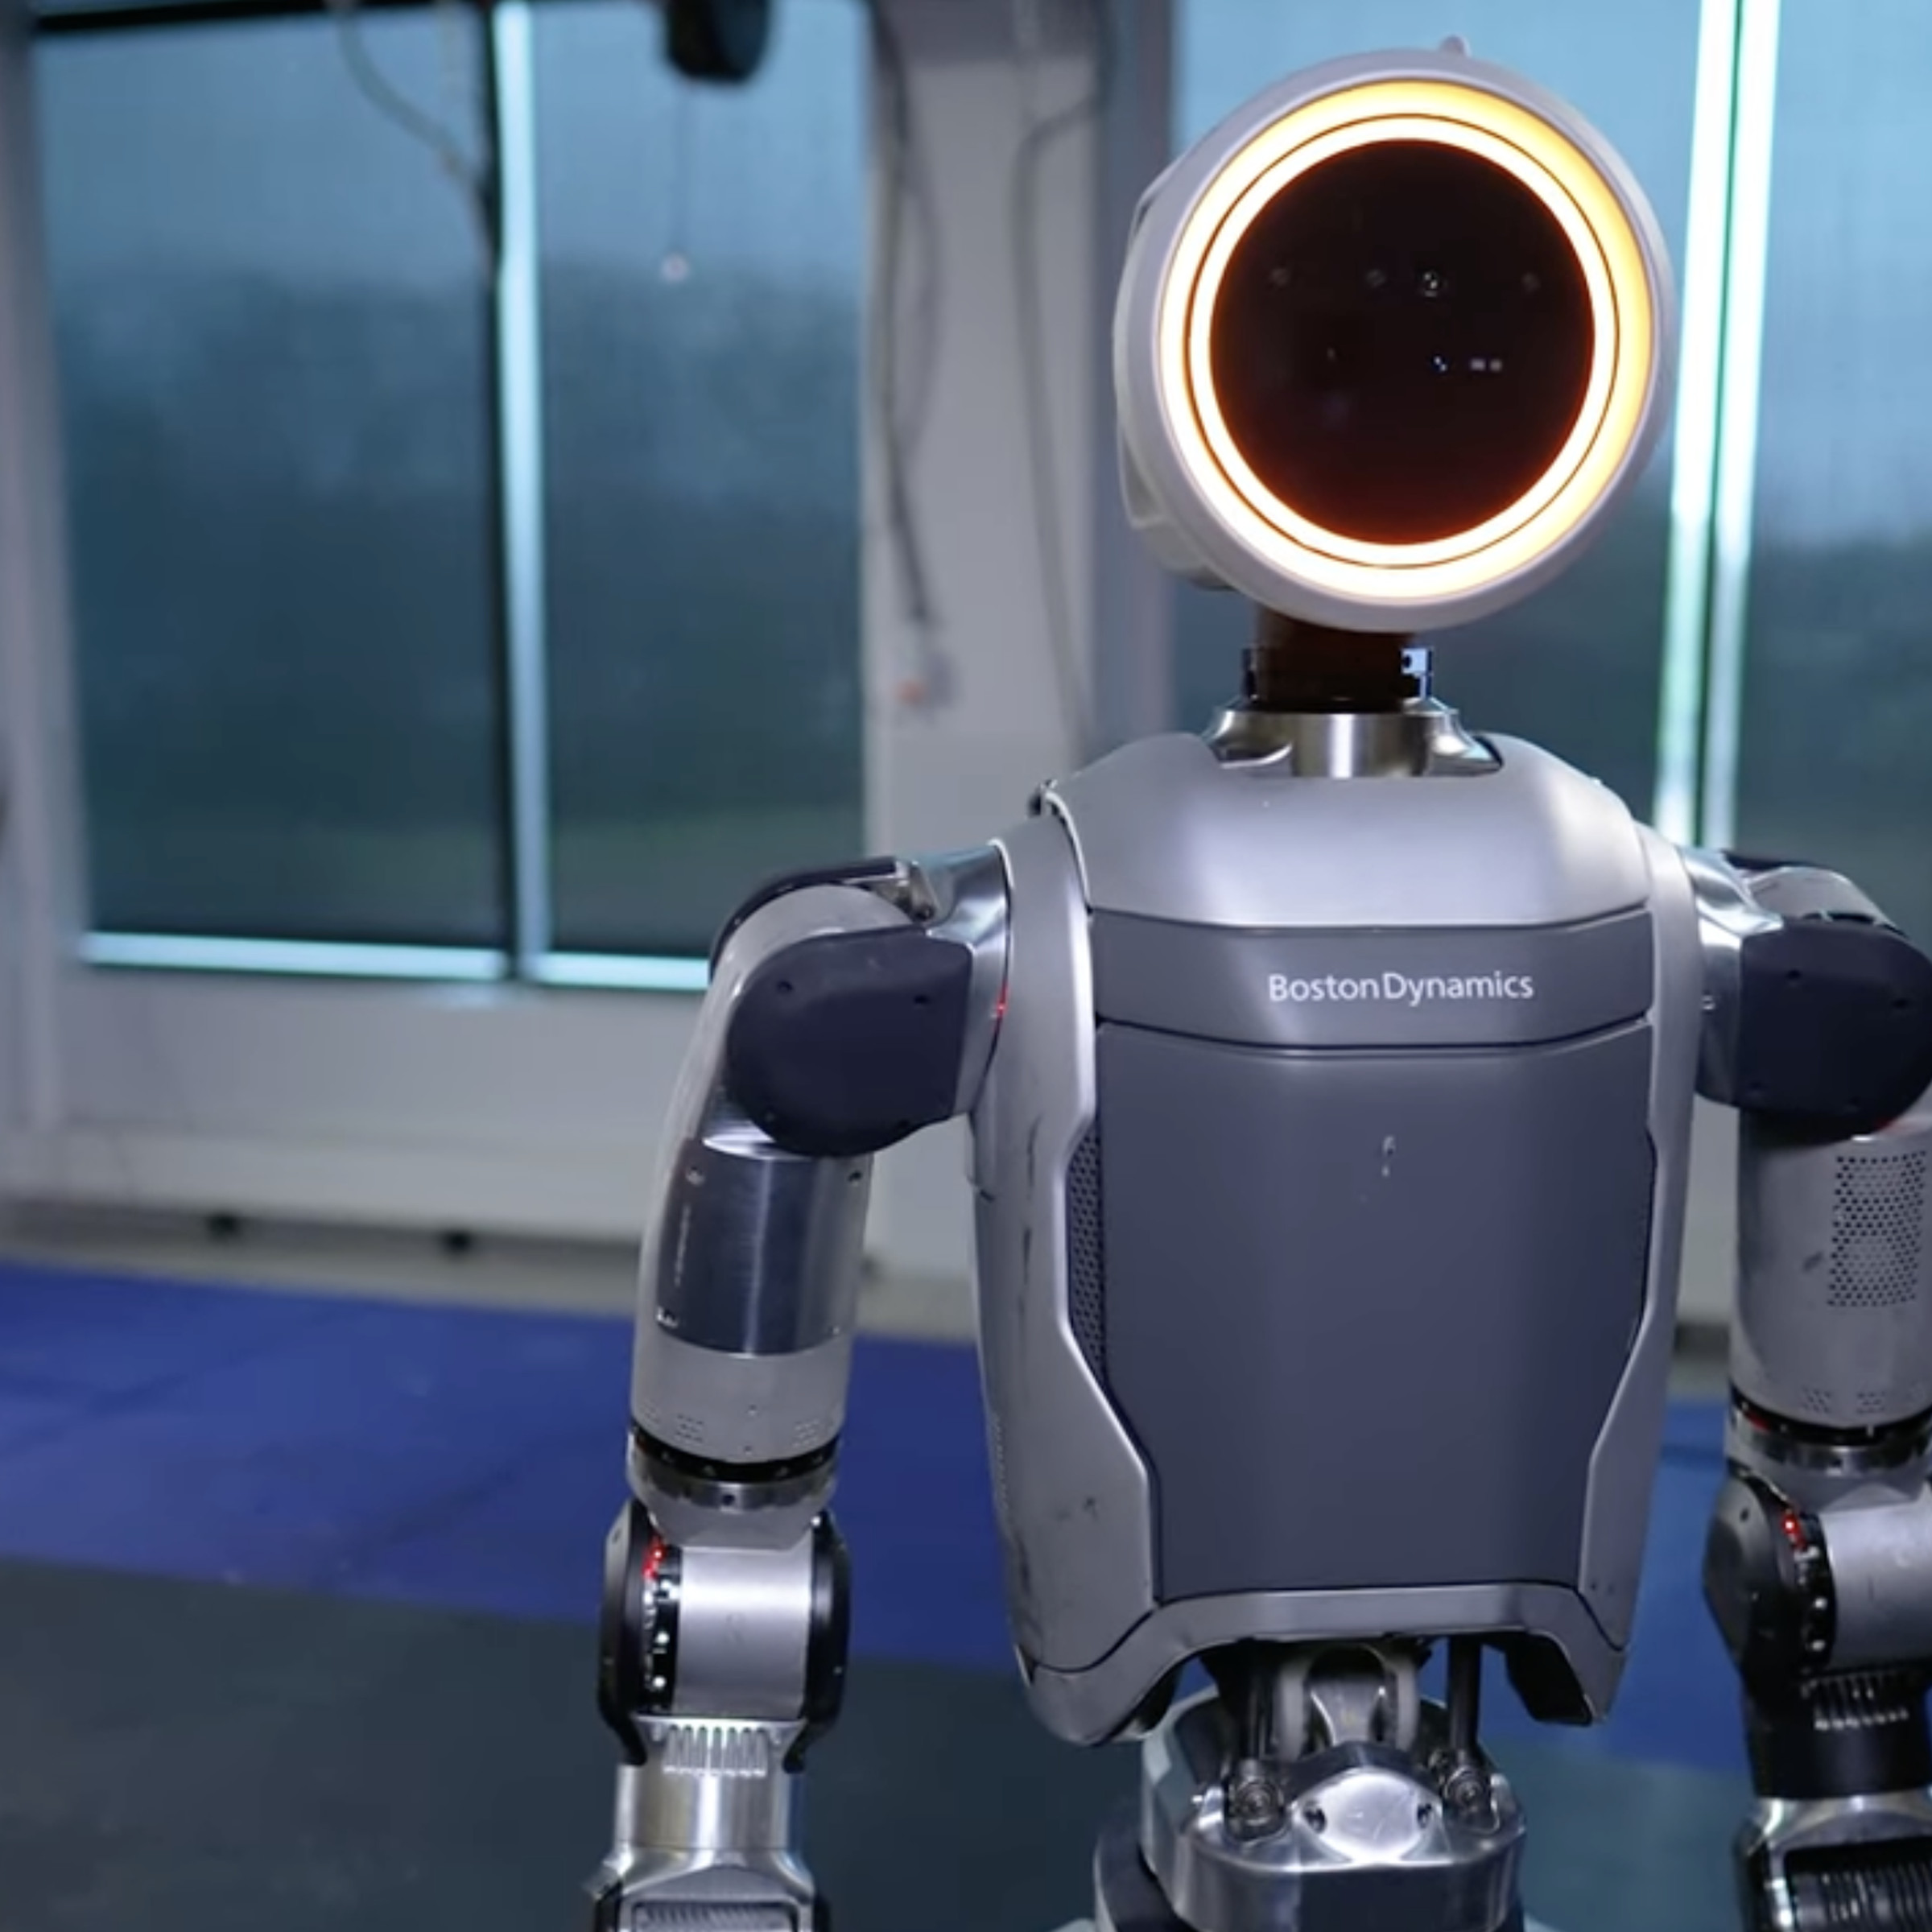 An image showing the new all-electric Atlas robot